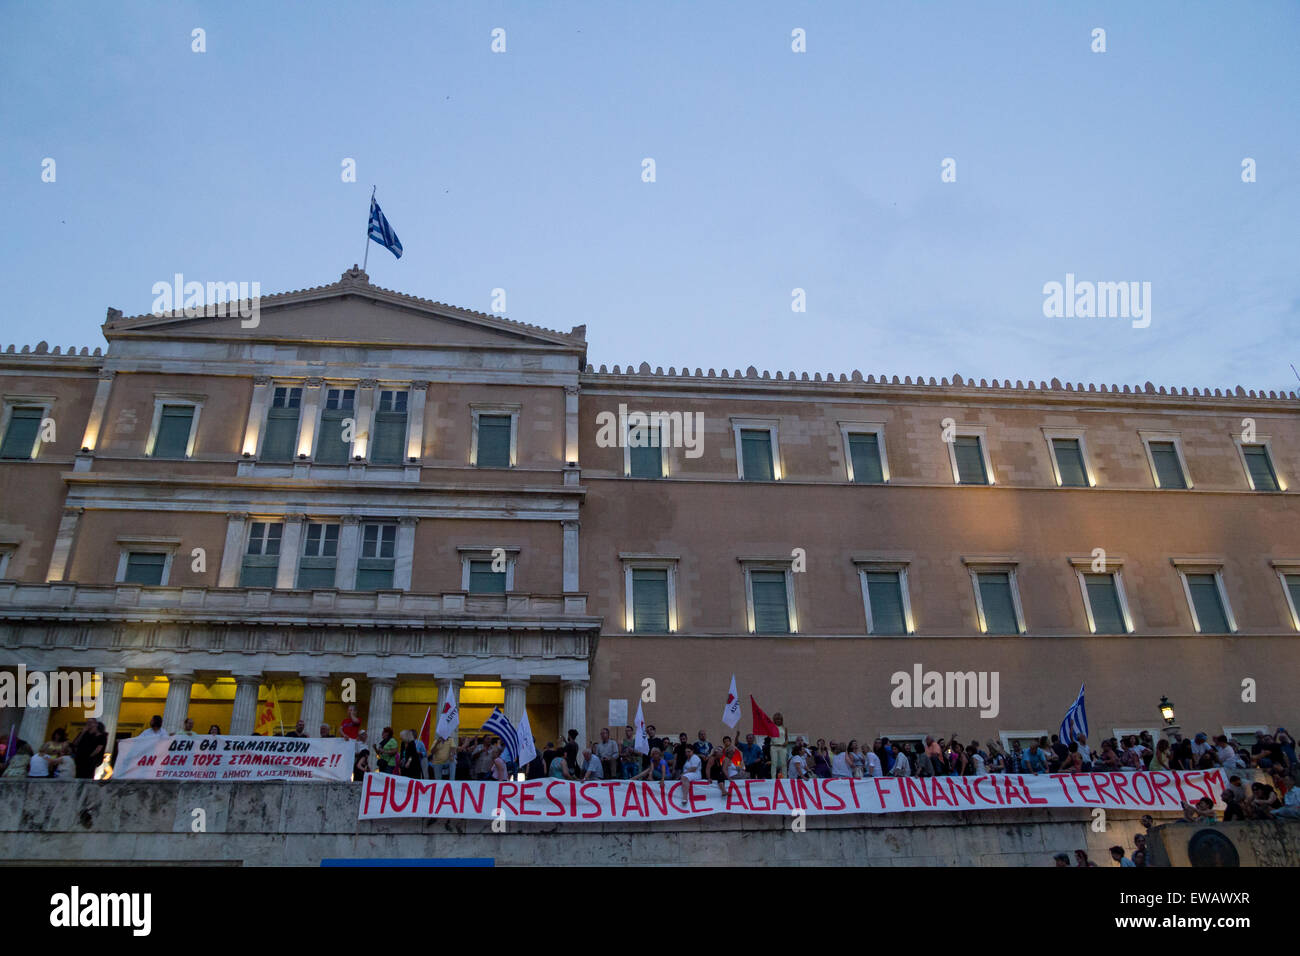 Athens, Greece. 21st June, 2015. An anti-austerity placard hangs in front of the Parliament building. Greeks demonstrate against austerity prior to Monday's 22nd July Eurogroup which is possible to decide if Greece remains or exits Eurozone. Credit:  Kostas Pikoulas/Pacific Press/Alamy Live News Stock Photo